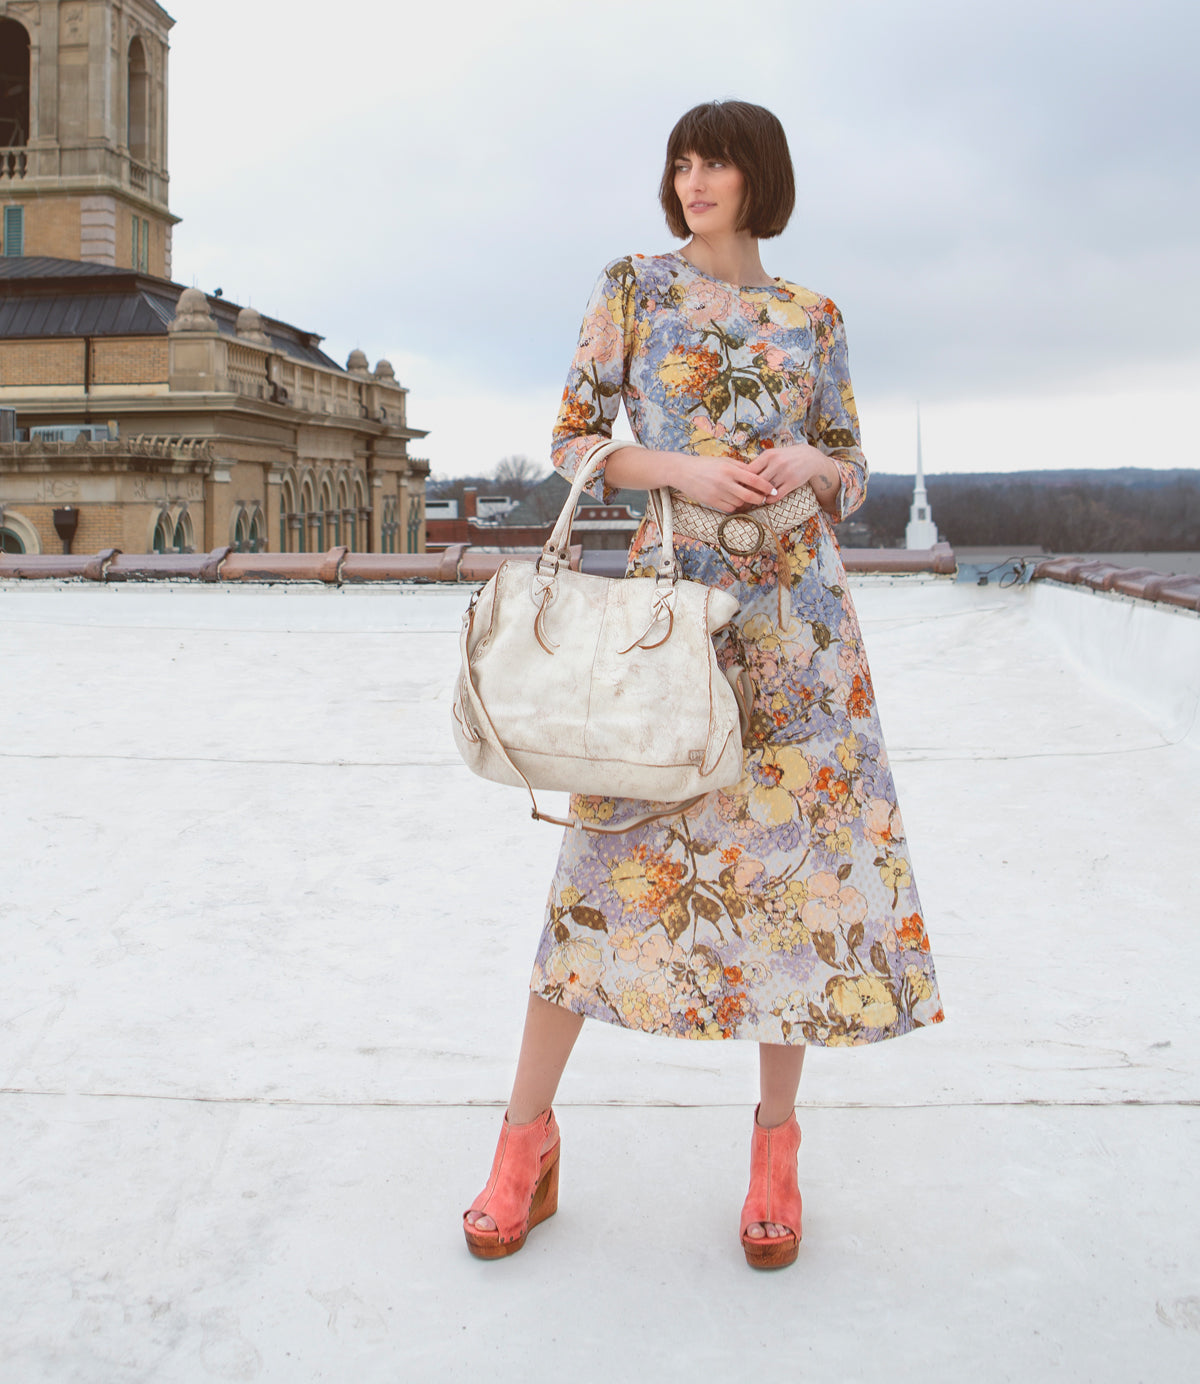 Woman in a floral dress and red shoes with ankle buckles holding a large white "Imelda" handbag on a rooftop with a cloudy sky backdrop and distant buildings. (Bed Stu)